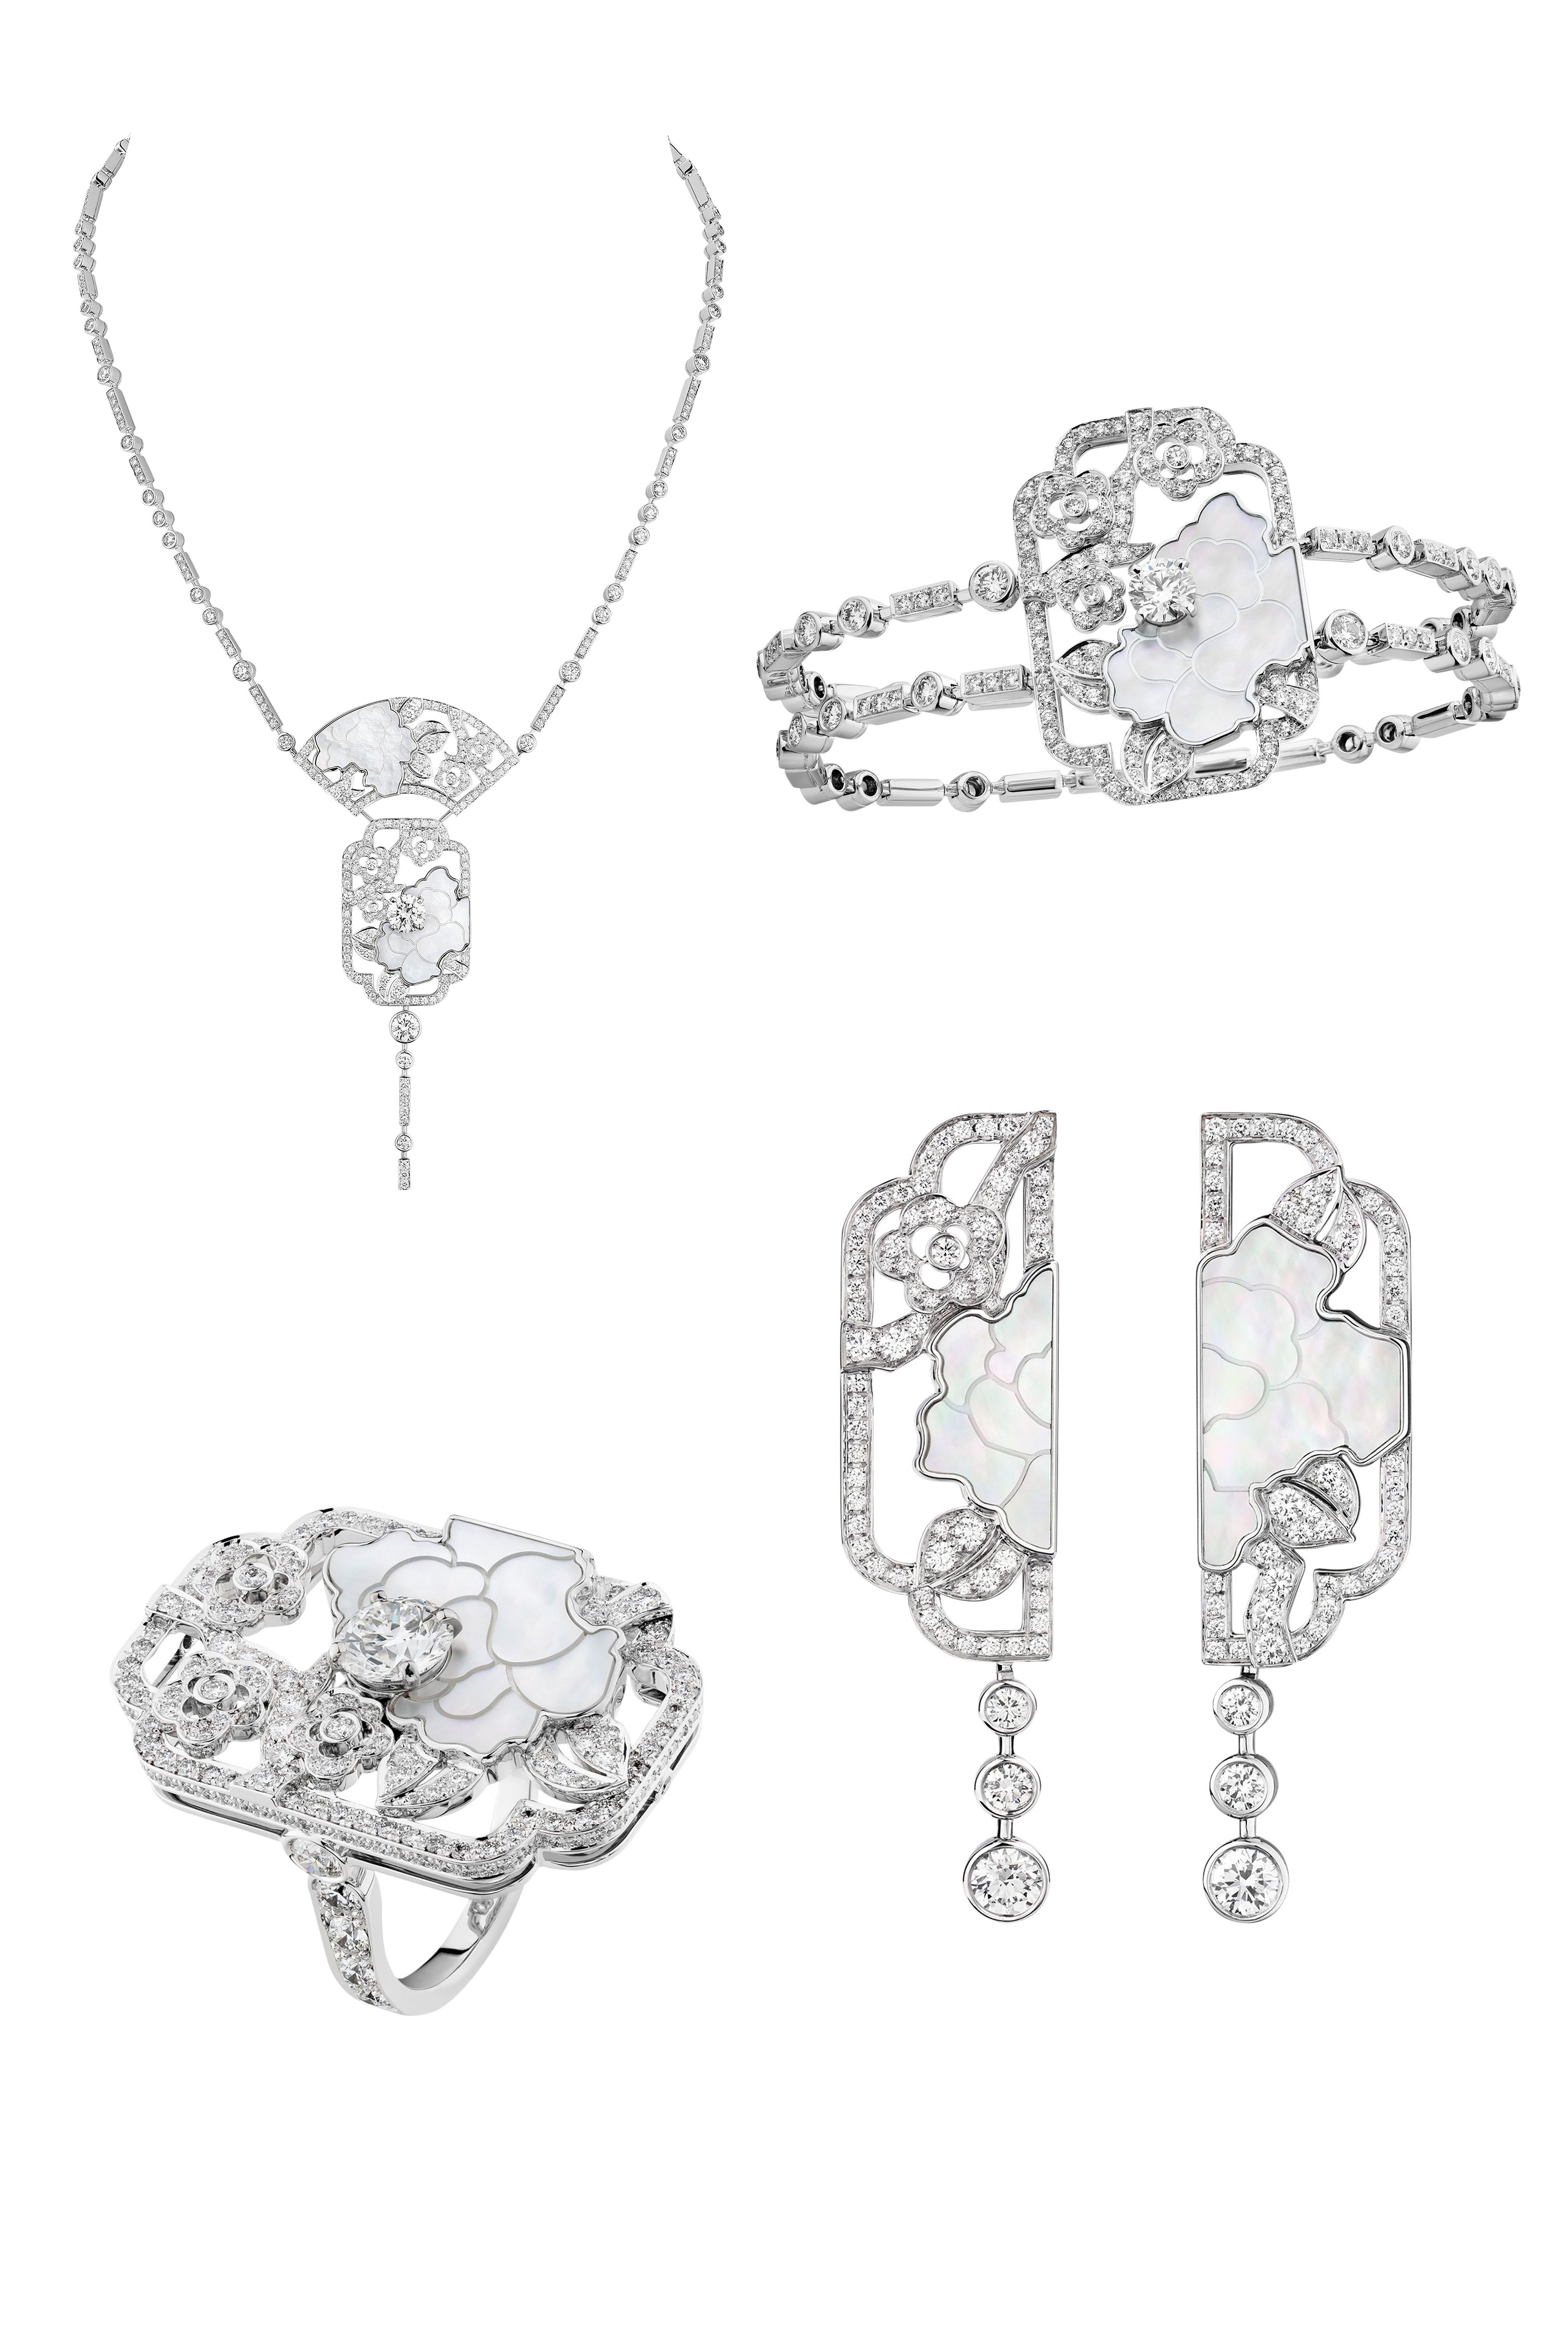 Chanel's Latest High-Jewelry Collection is Inspired by Coromandel Screen -  A Look at the Iconic Pieces